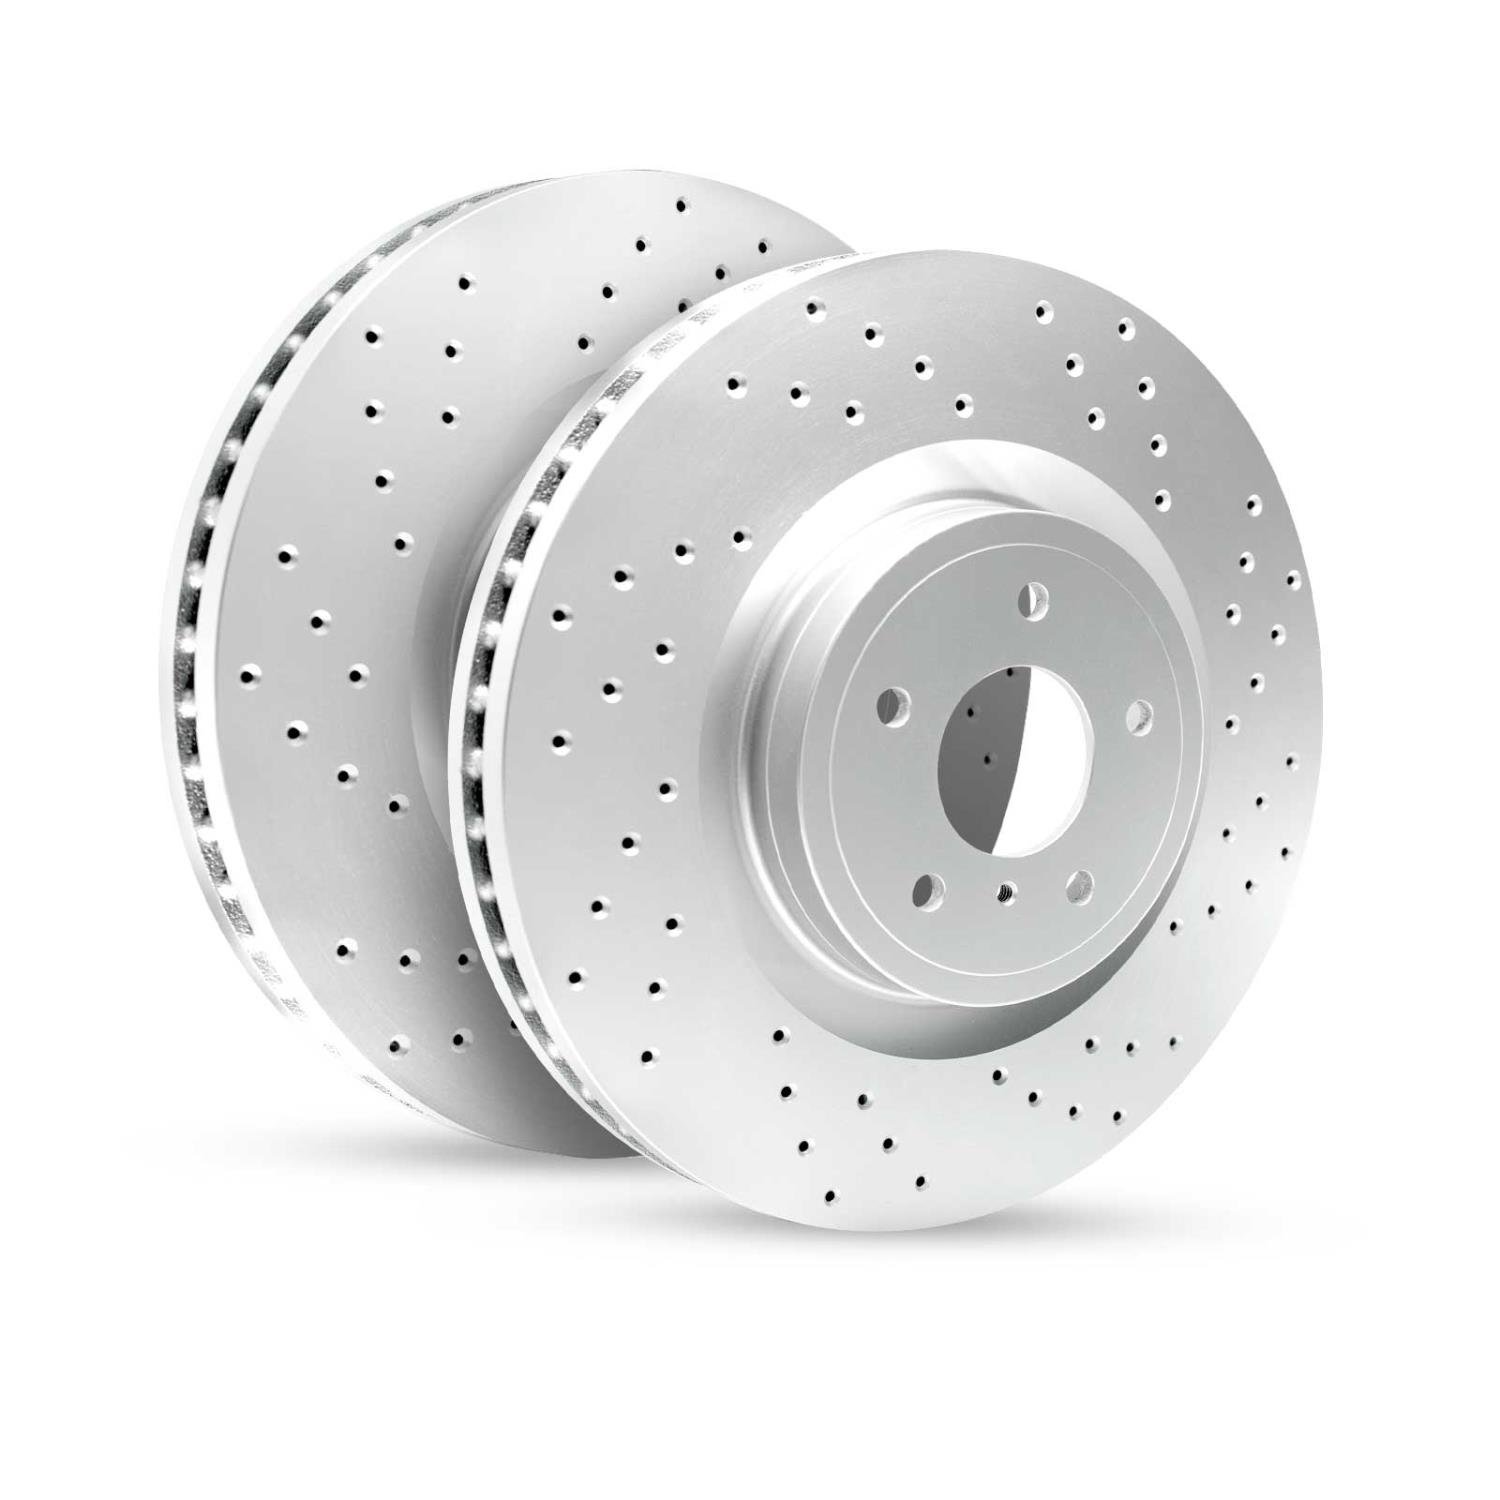 GEO-Carbon Drilled/Slotted Rotors, 2018-2020 Fits Multiple Makes/Models, Position: Front